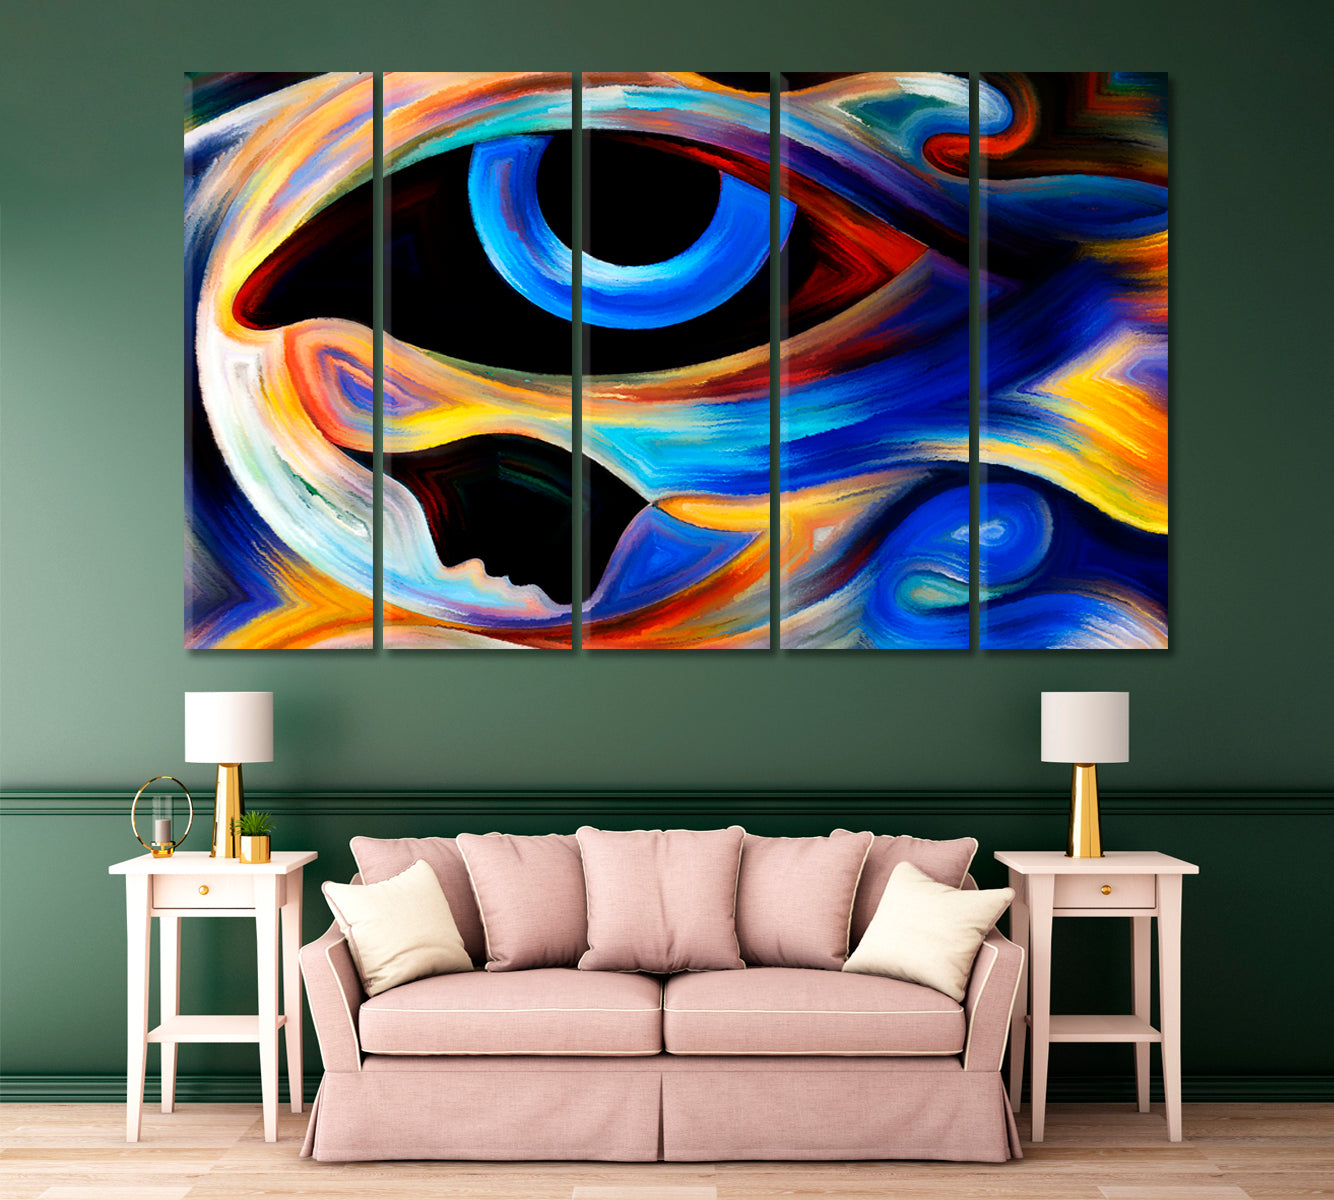 Intuition, Human Profile and Eye Consciousness Art Artesty 5 panels 36" x 24" 